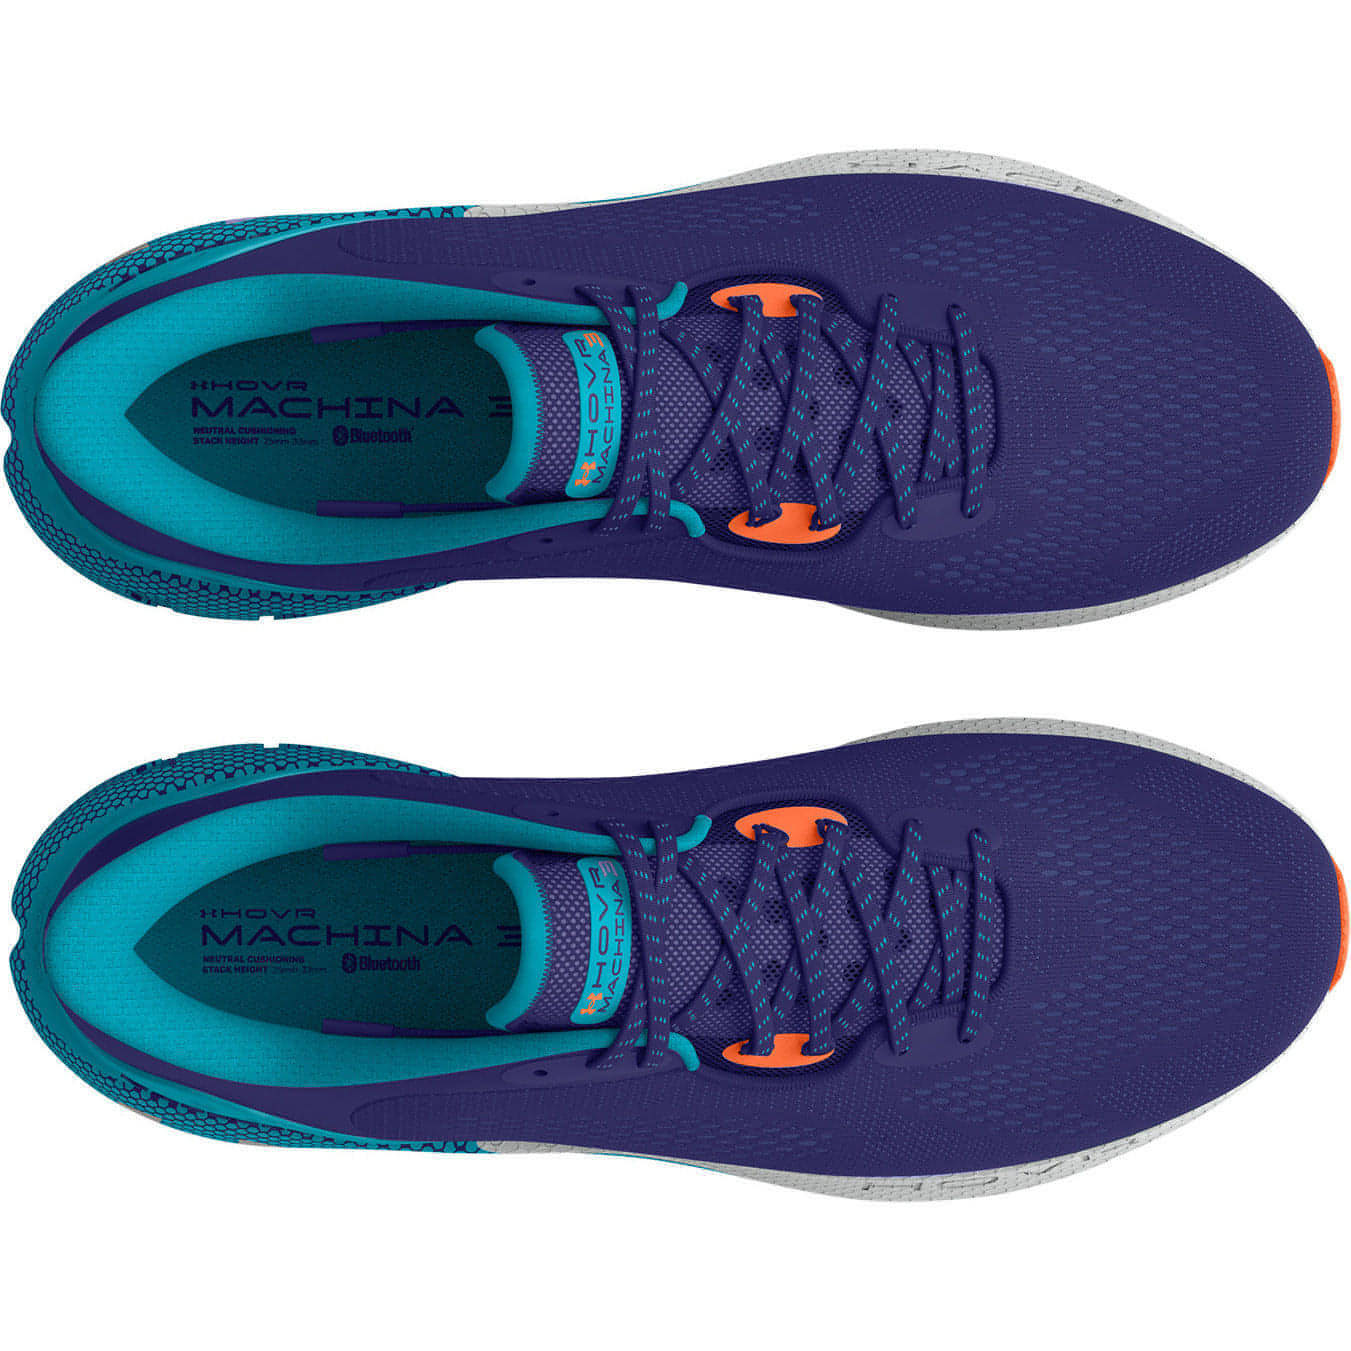 Under Armour HOVR Machina 3 Mens Running Shoes - Blue